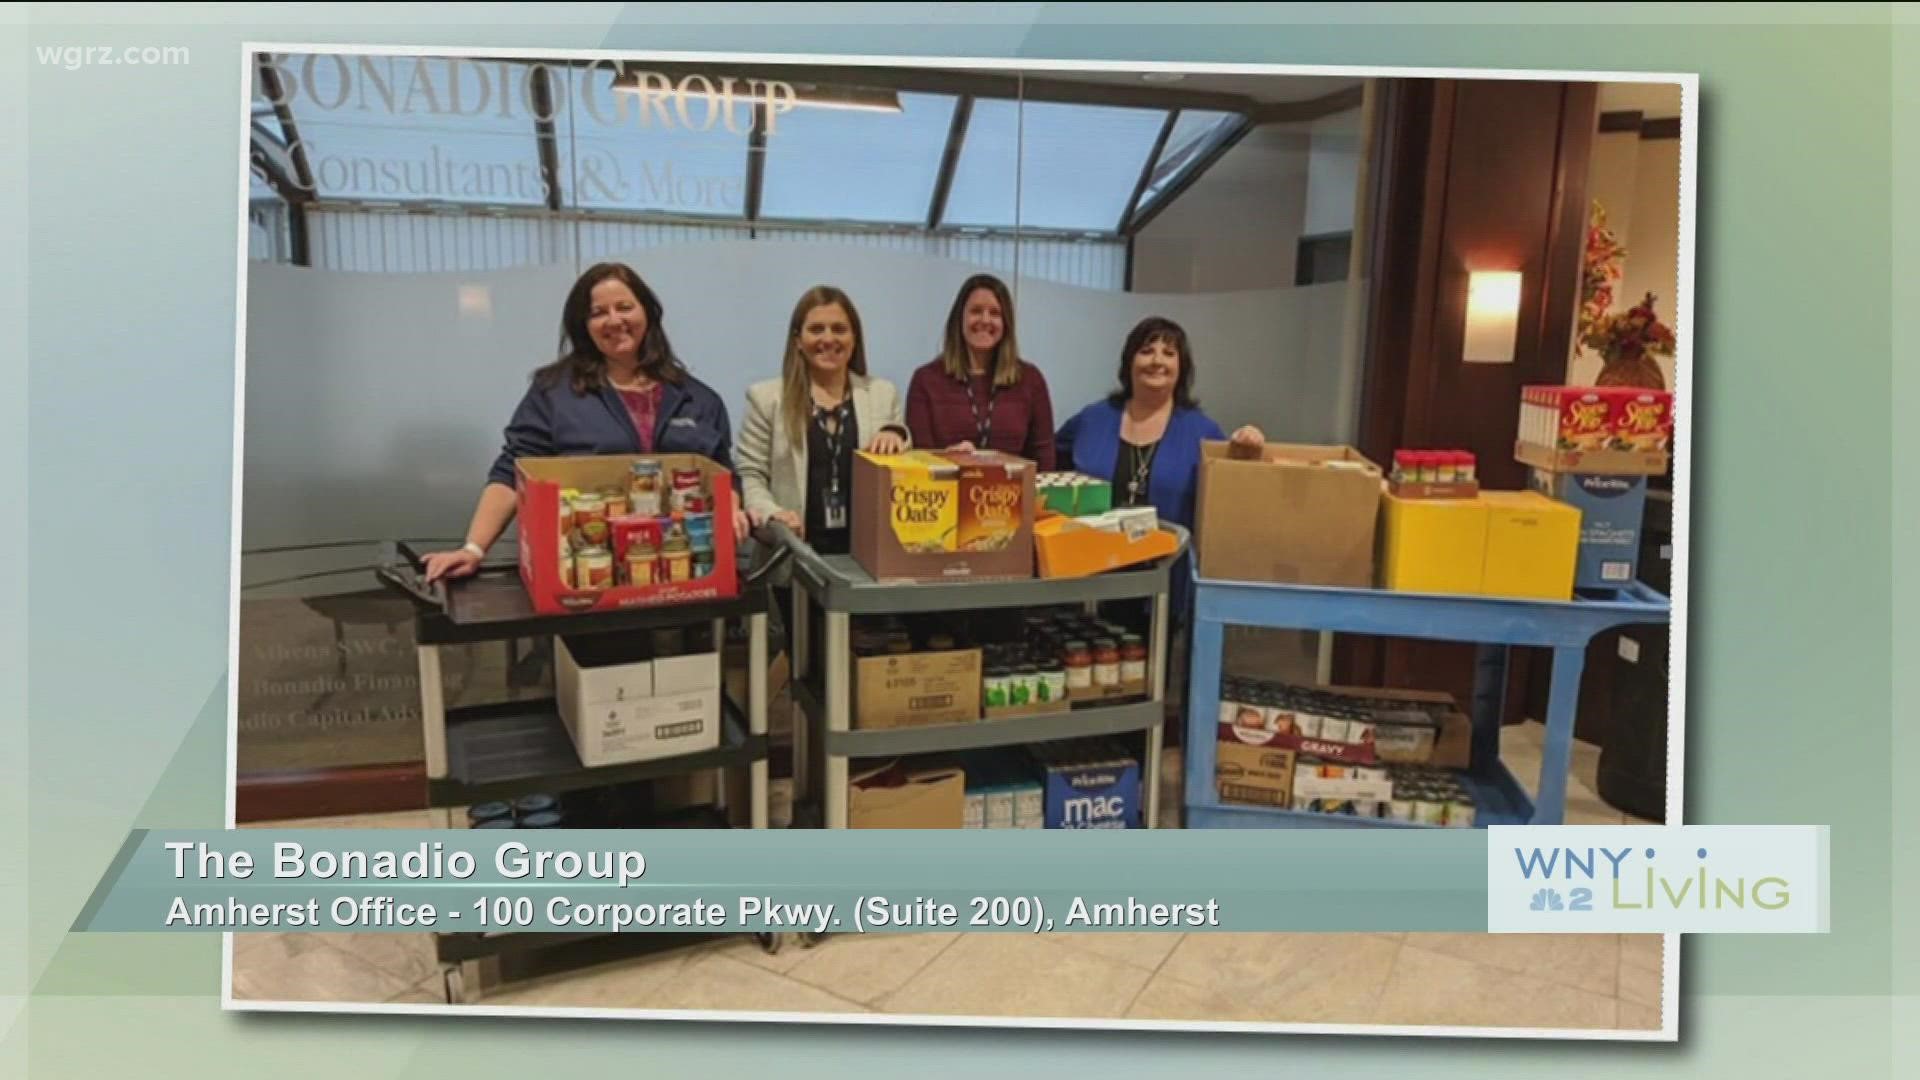 WNY Living - February 19 - The Bonadio Group (THIS VIDEO IS SPONSORED BY THE BONADIO GROUP)